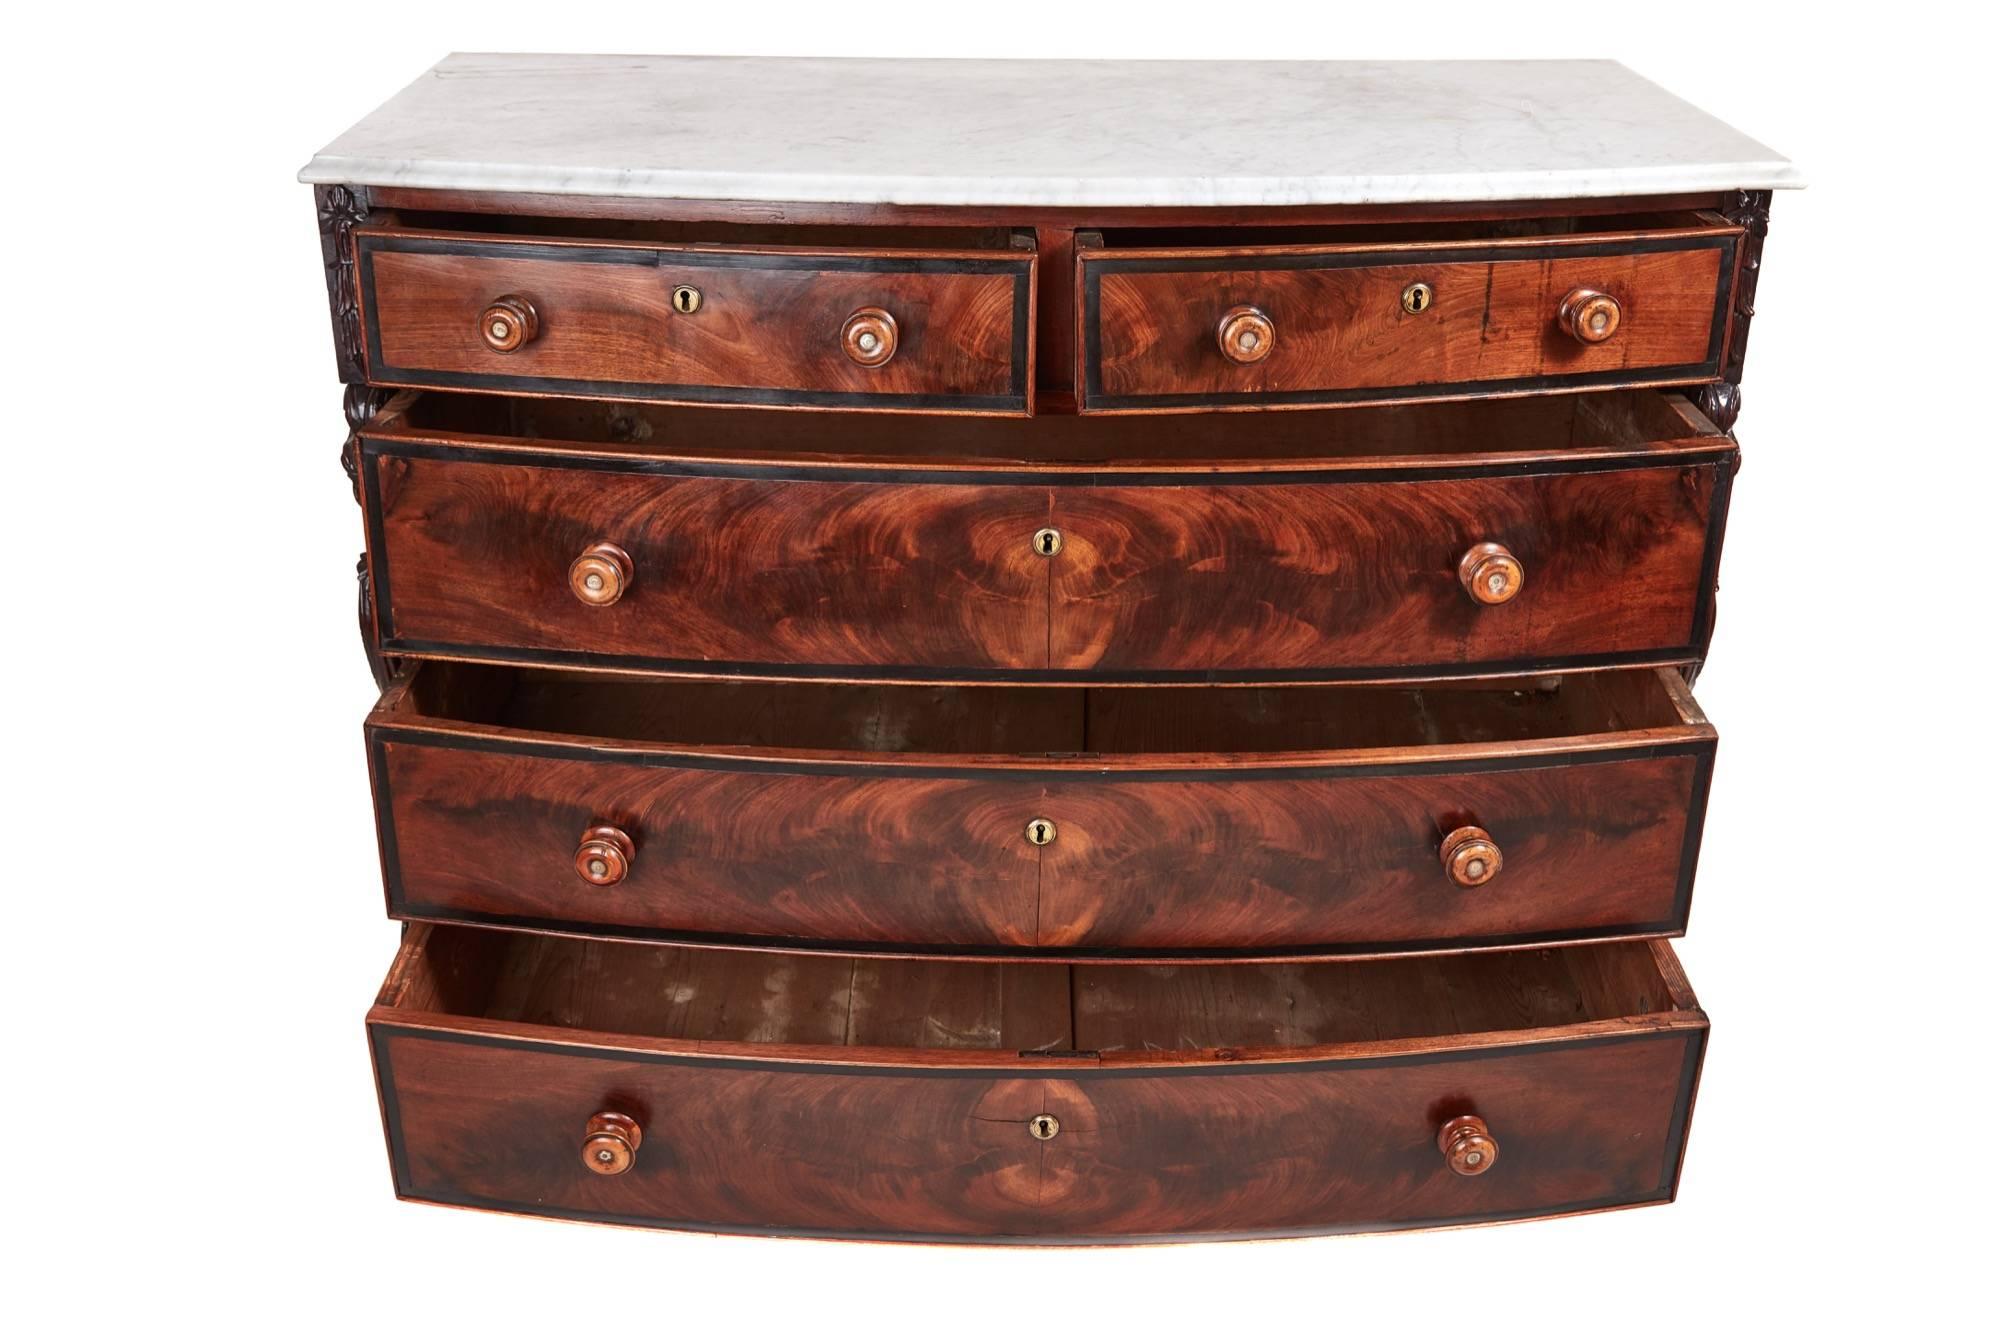 Unusual antique mahogany bow front chest, with a white marble top, thumb moulded edge, two short and three drawers long drawers in figured mahogany crossbanded in ebony, with original turned knobs, standing on turned feet.
Lovely color and